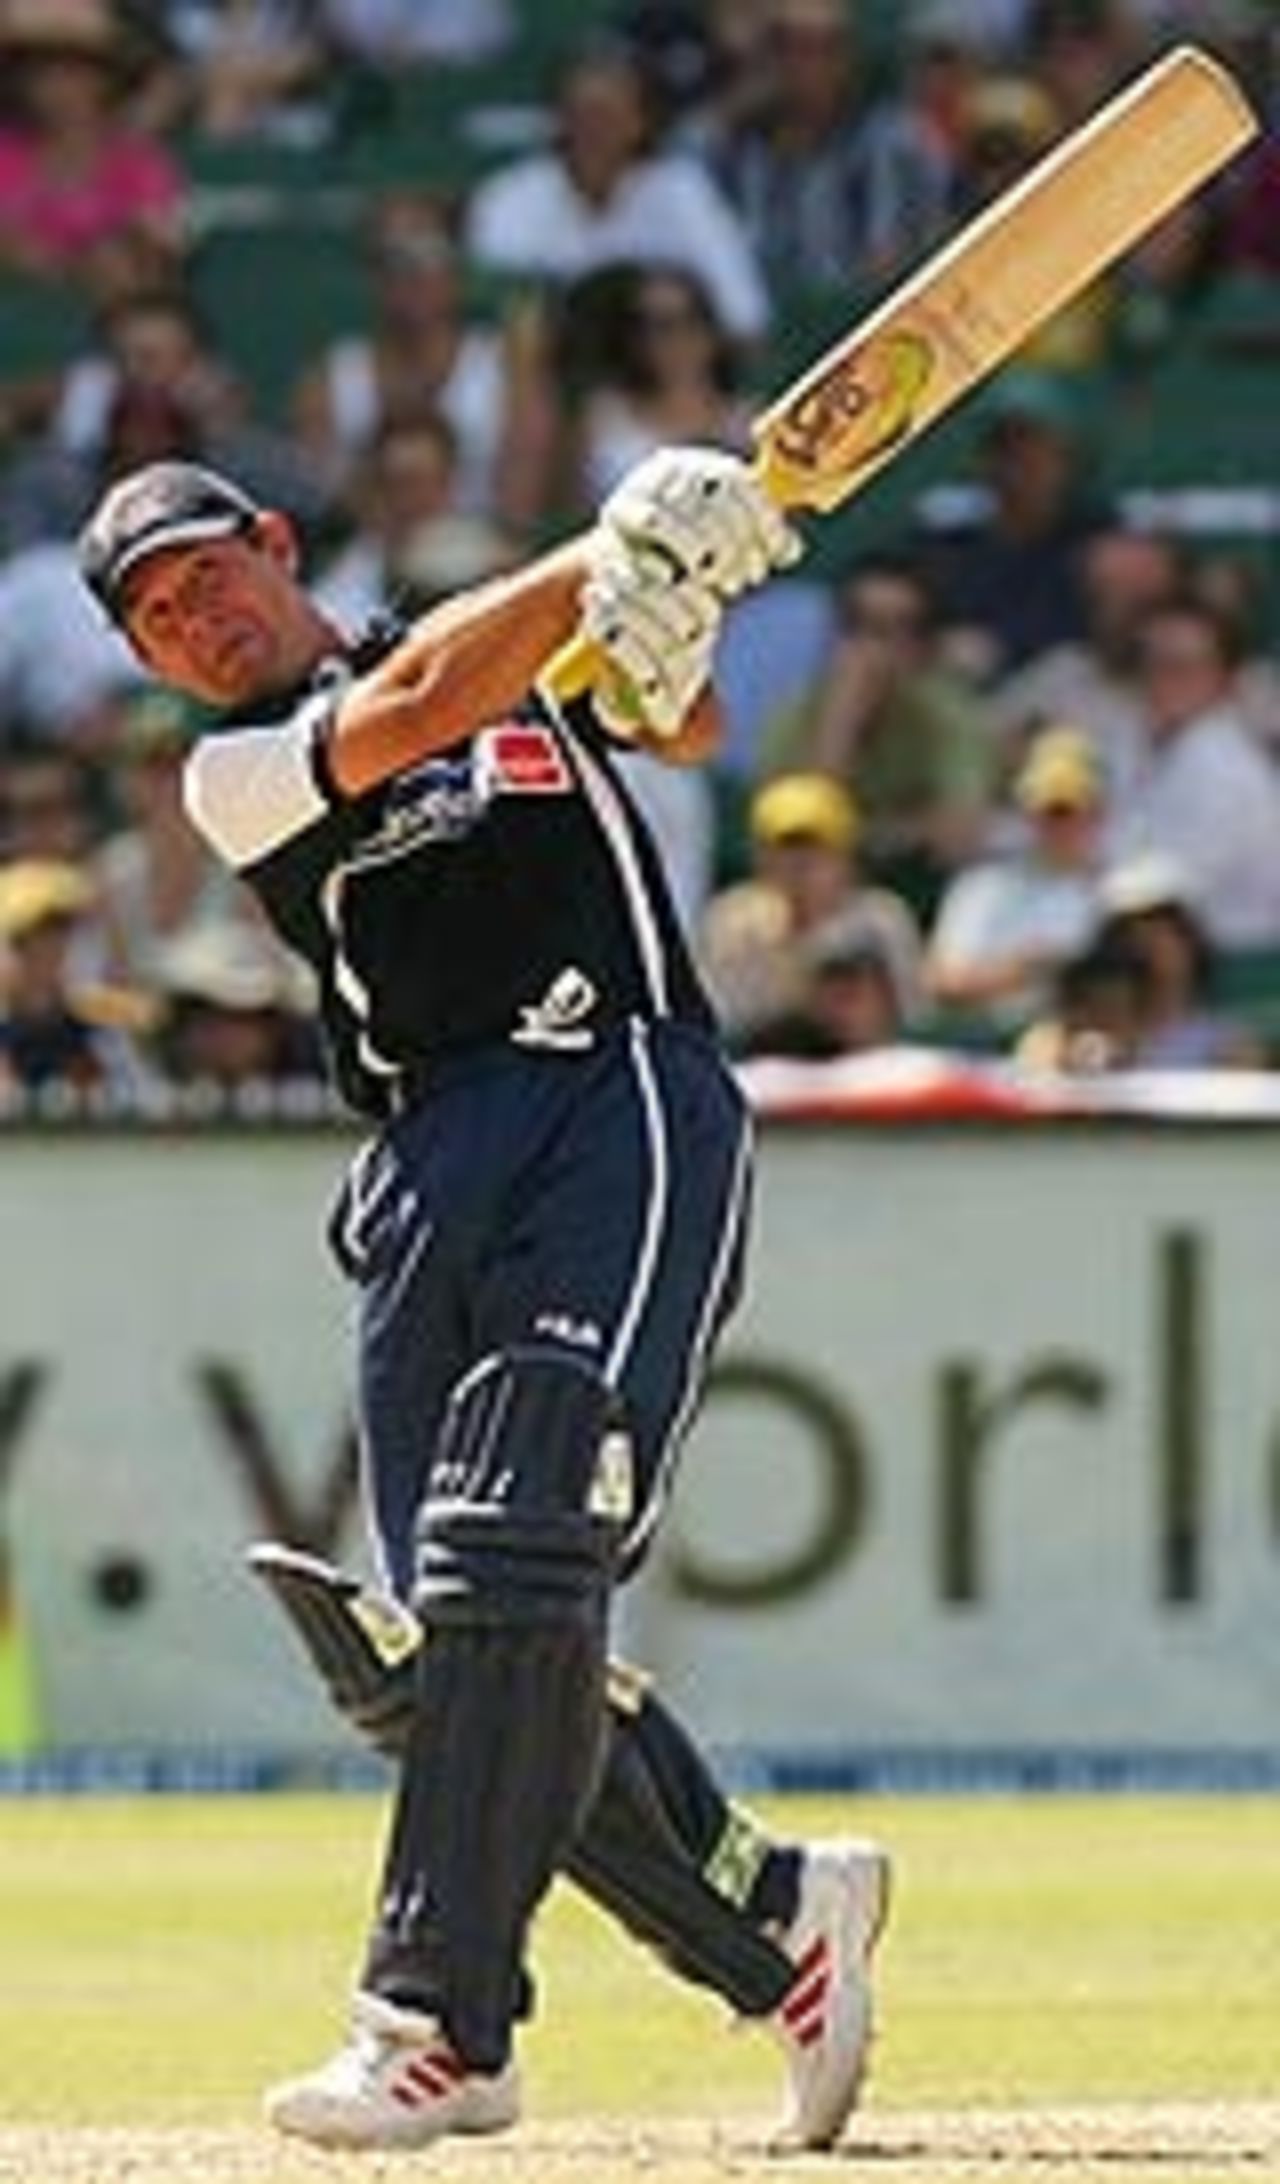 Ricky Ponting tonks one to long-on, ICC XI v Asian XI, Melbourne, January 10, 2005